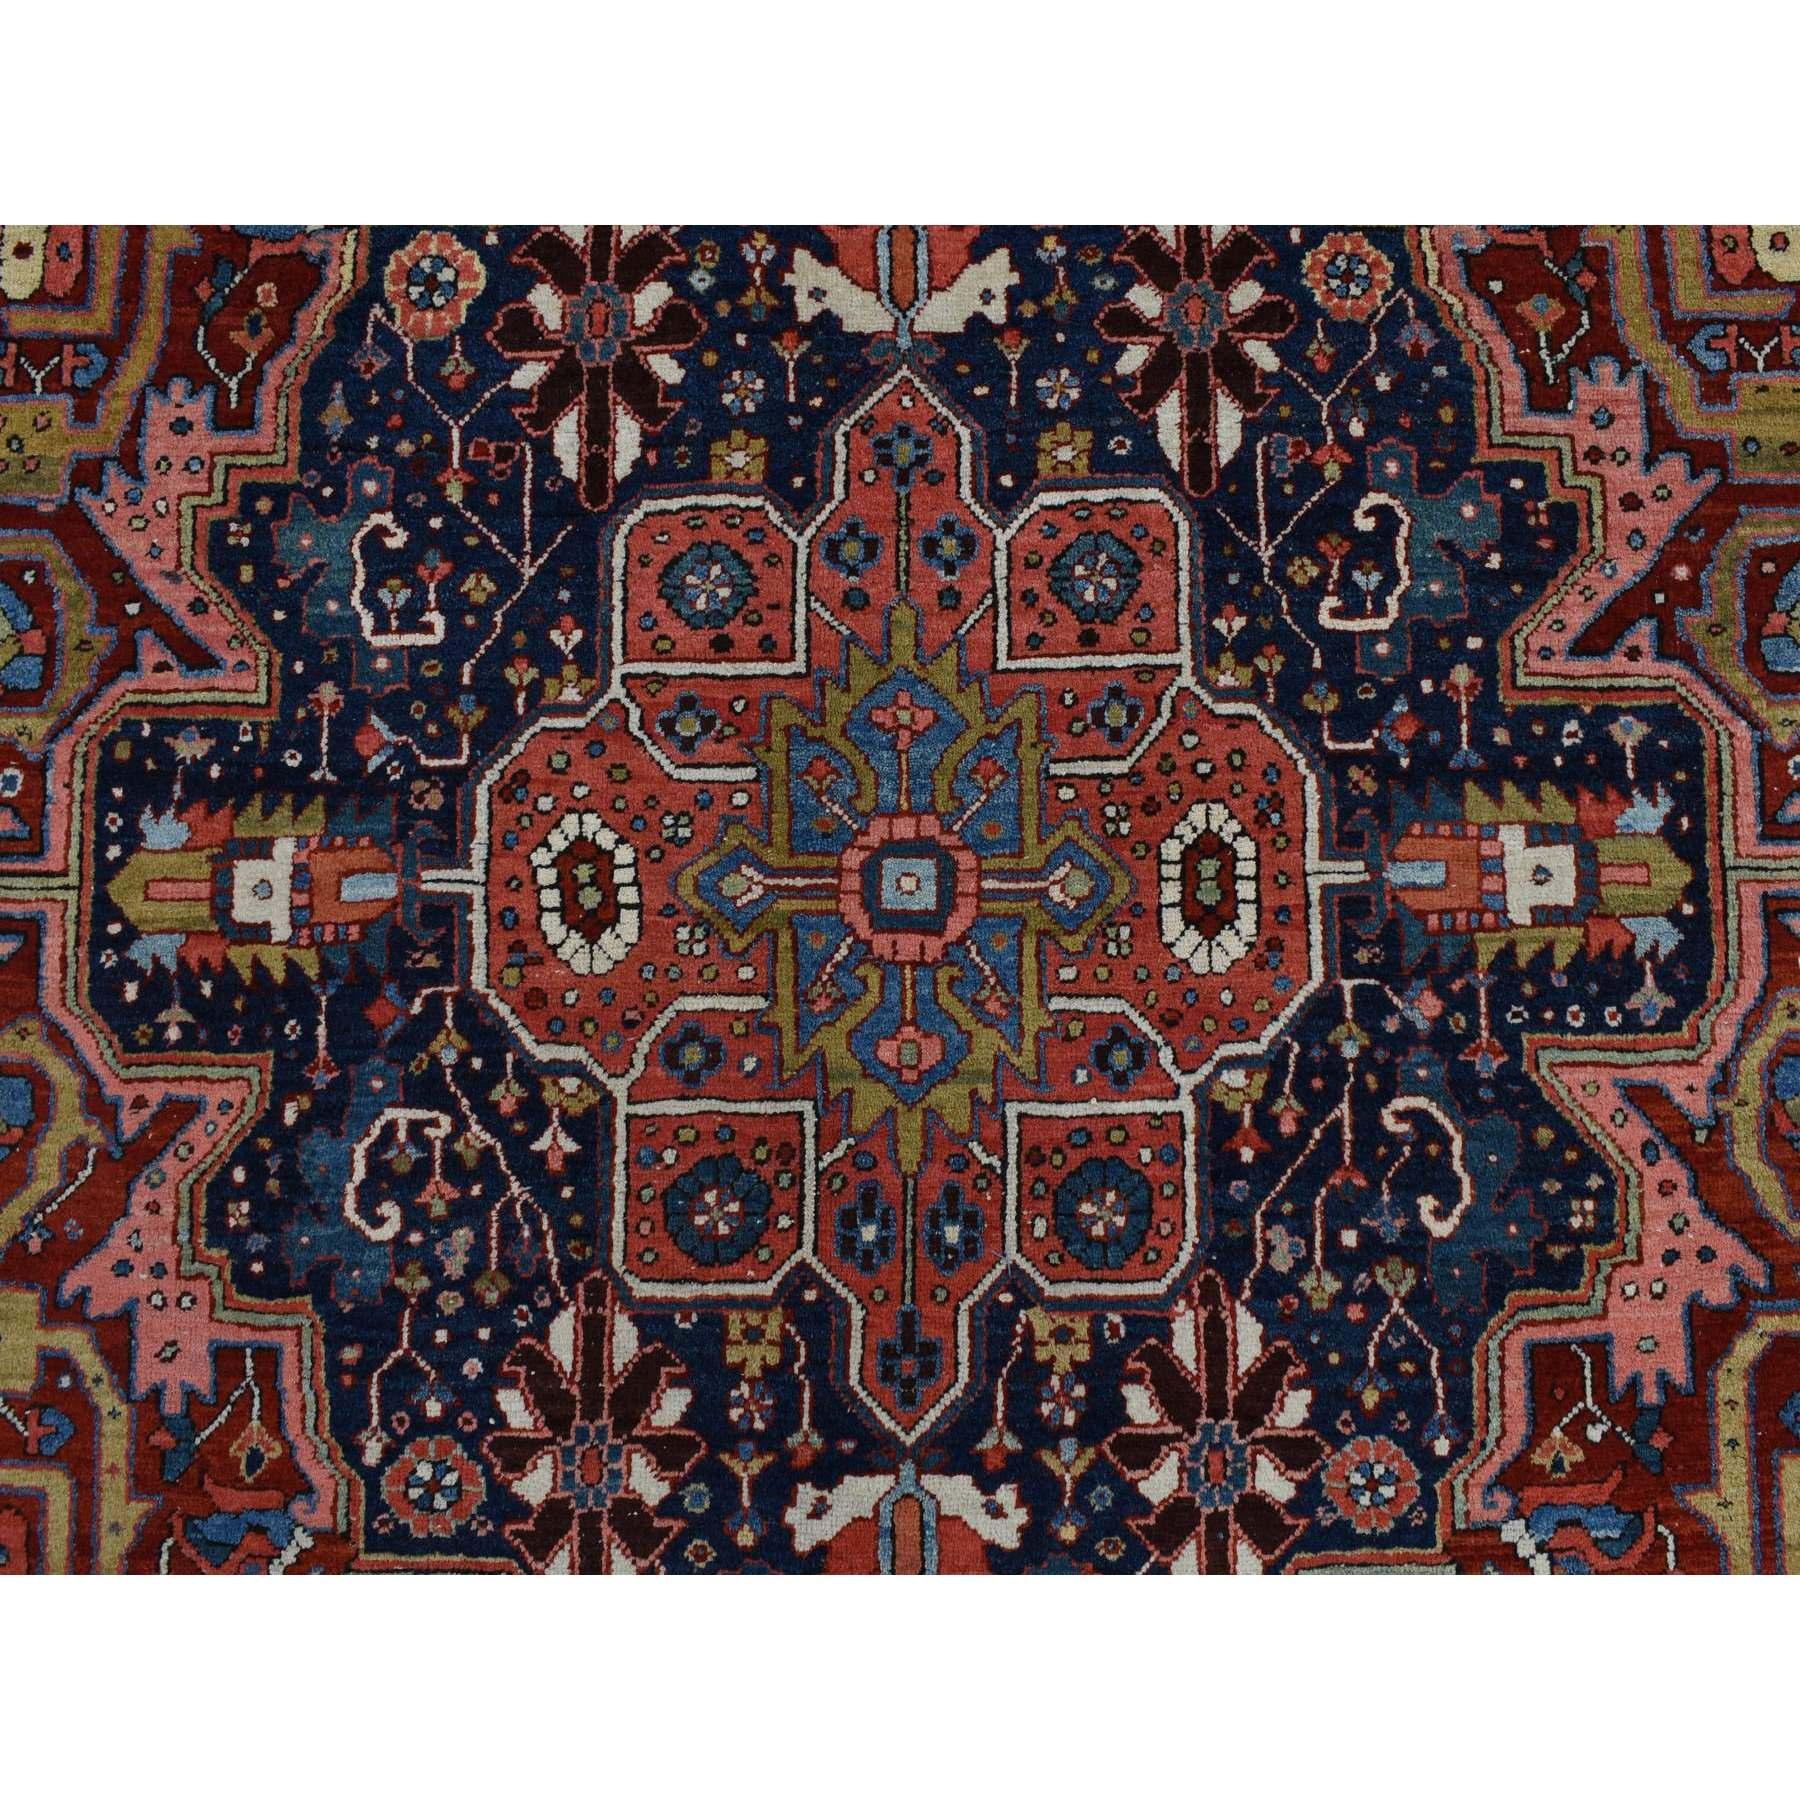 Early 20th Century Red Antique Persian Heriz Soft Worn Wool Hand Knotted Oriental Rug 8'3